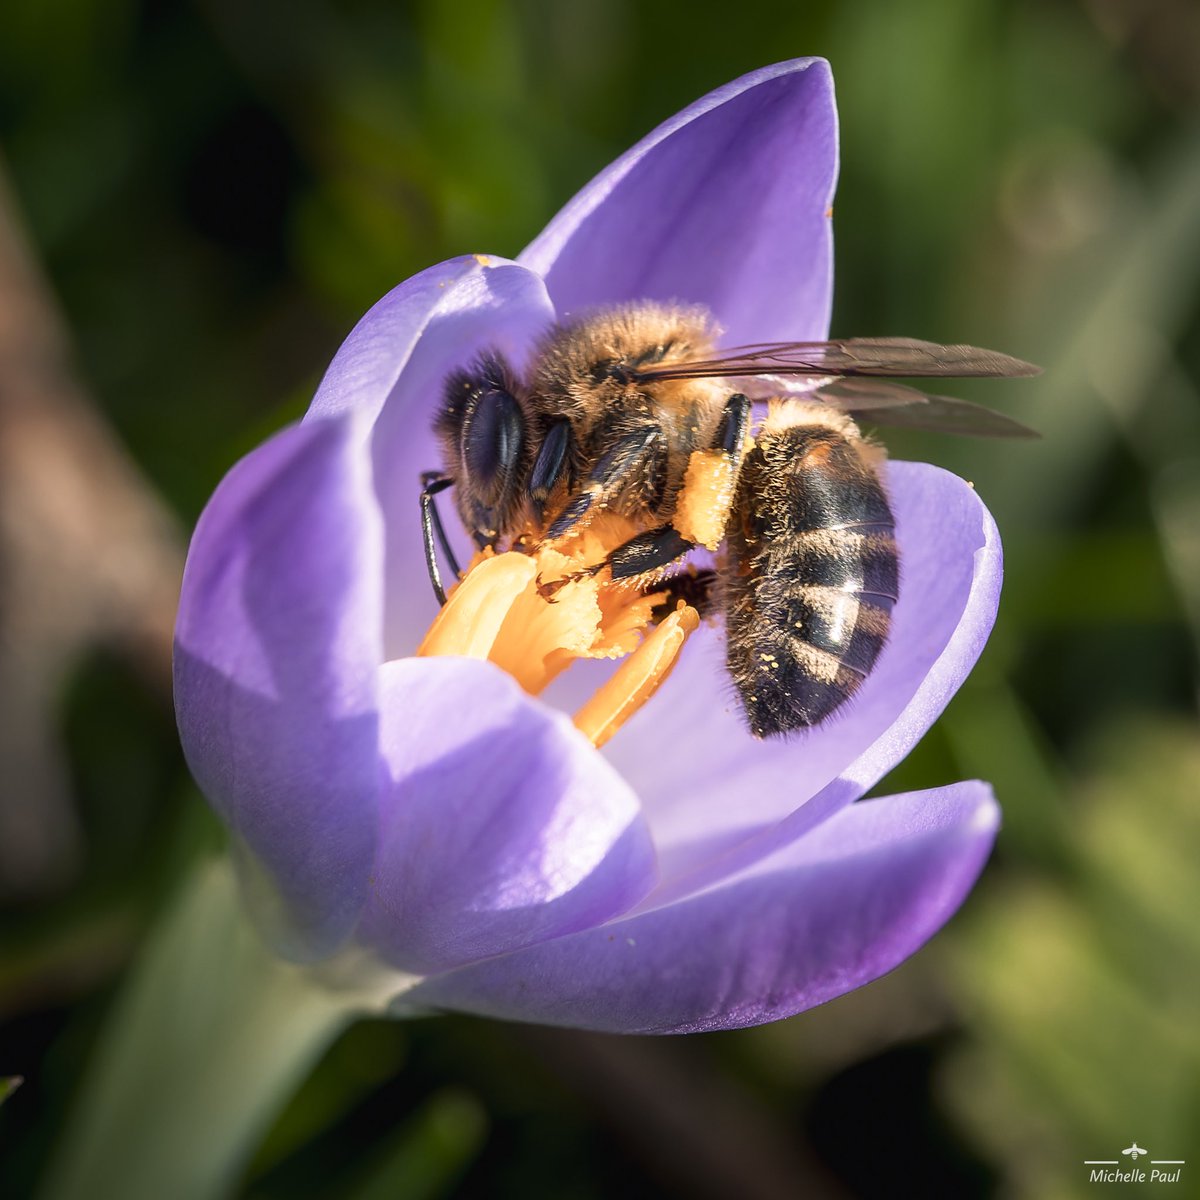 Spring has arrived! Had a super day in the sun… so did this honey bee, collecting pollen from the spring crocuses 🌸 

#TwitterNatureCommunity #TwitterNaturePhotography #spring #crocus #flowers #bees #purple #lovebees #SpringIsInTheAir